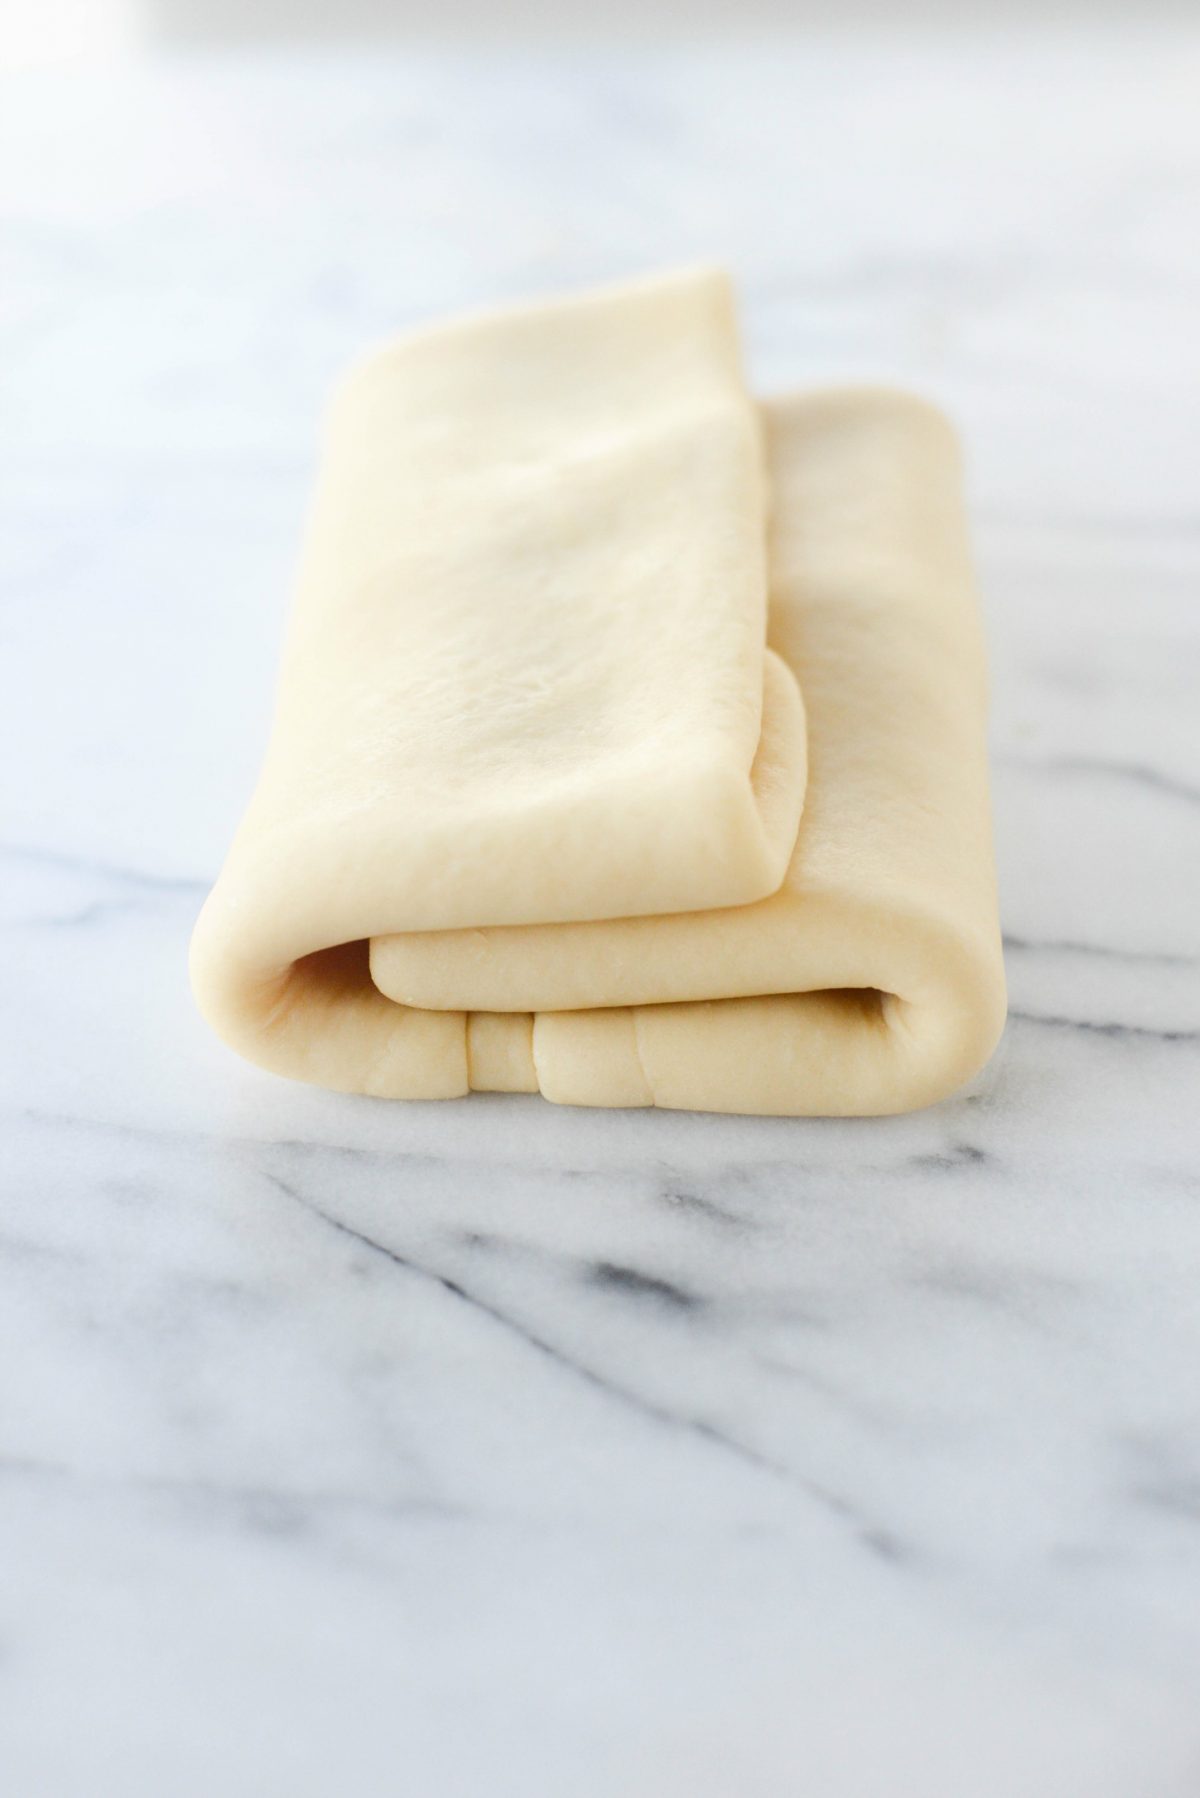 Once you've rolled and folded the dough, wrap it tightly in plastic wrap and refrigerate for 4 hours or overnight